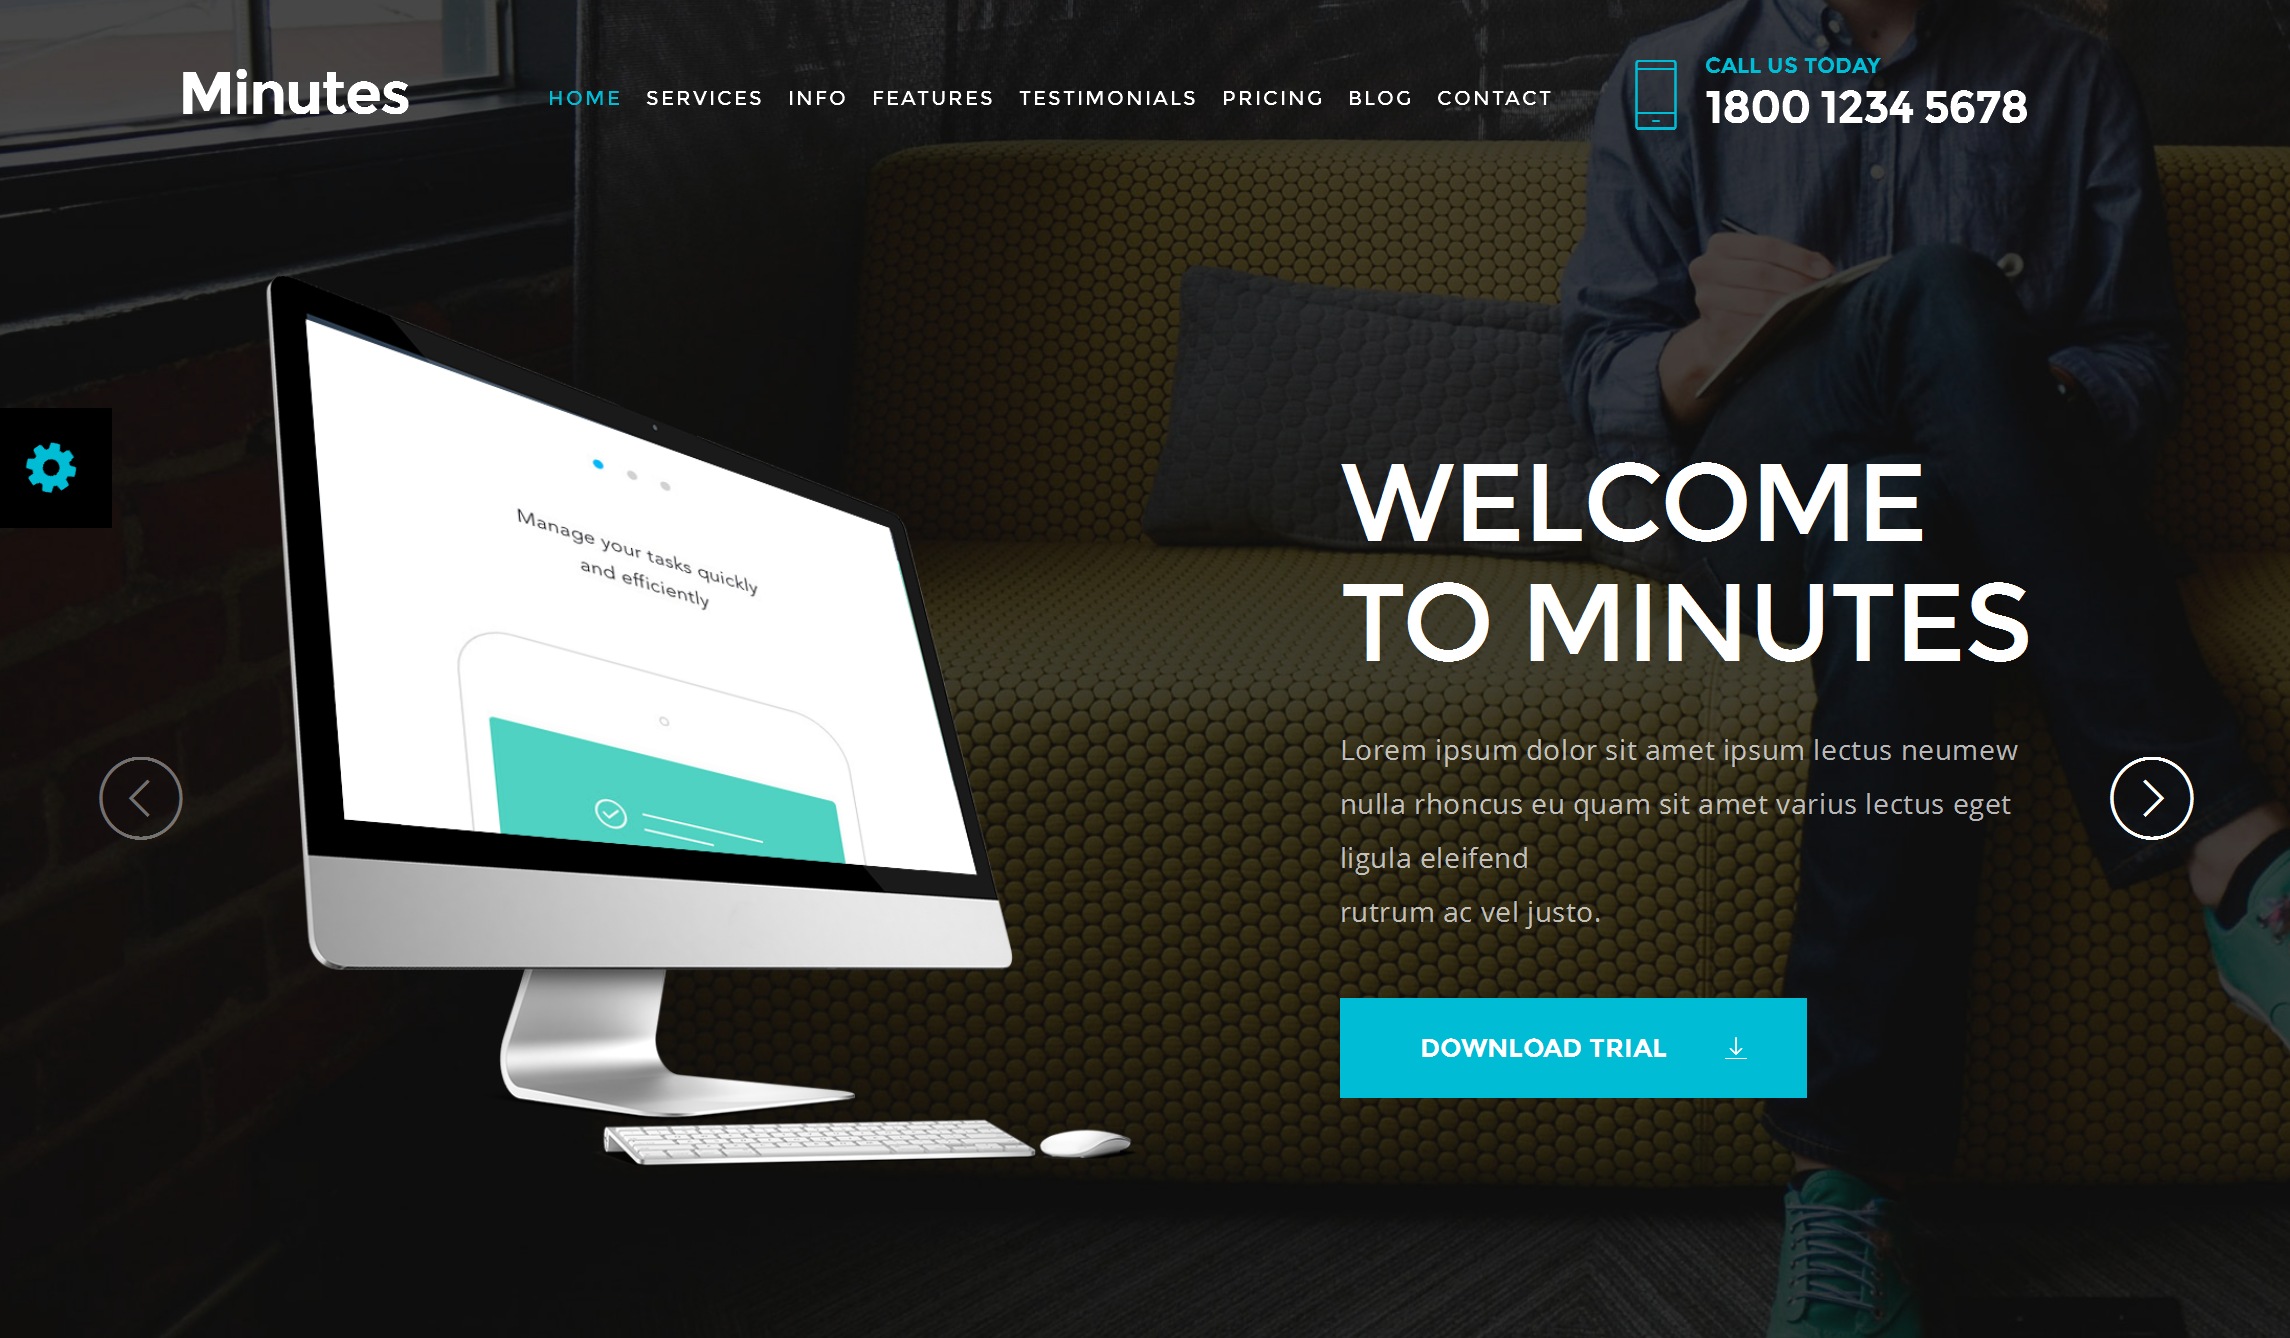 Free Download Bootstrap Carousel Theme